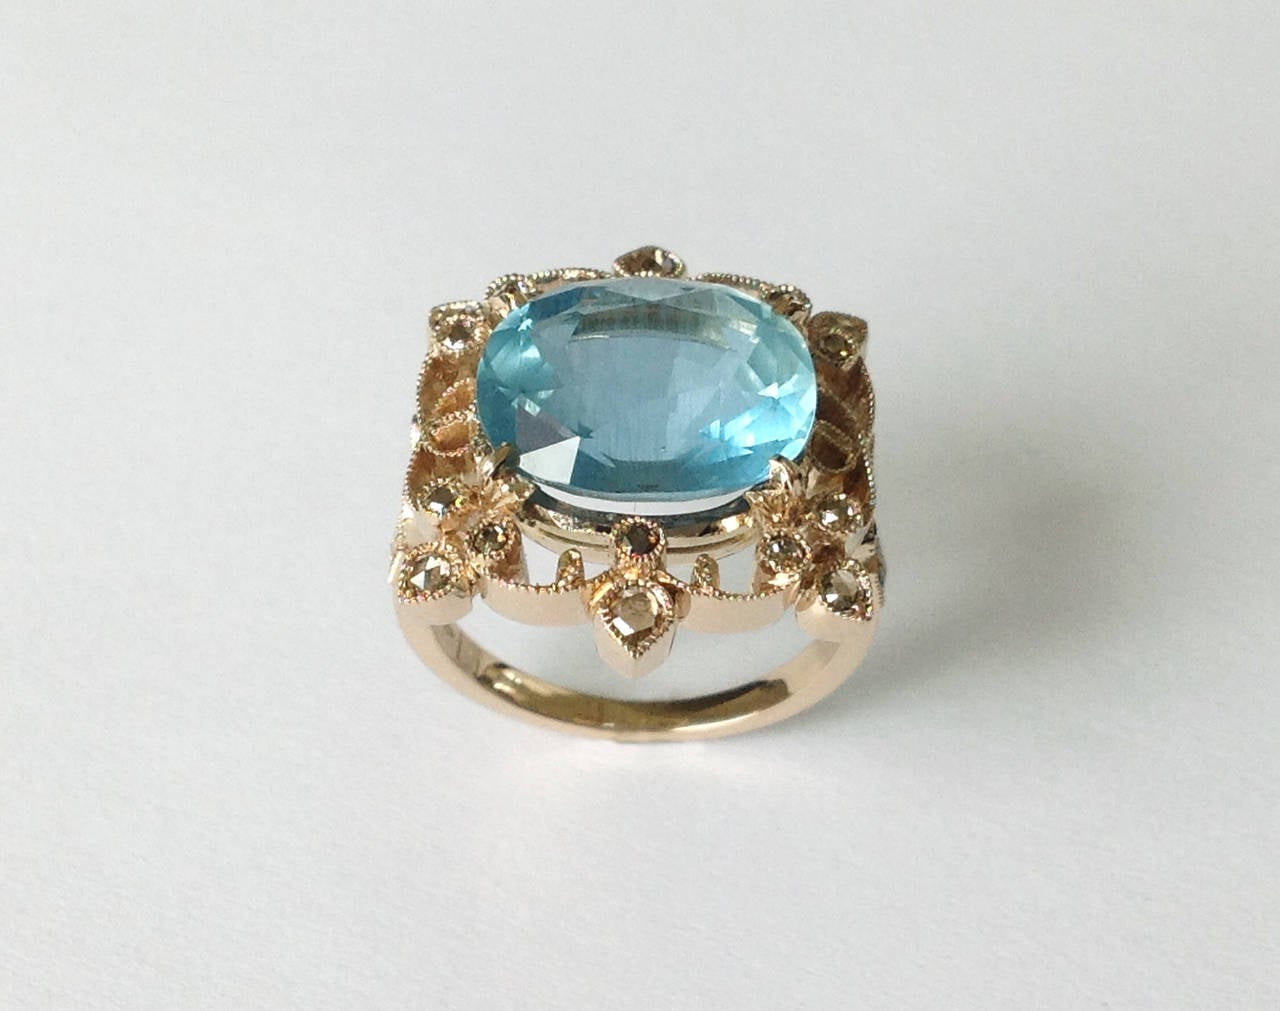 Dalben design Aquamarine and brown Diamond Ring mounted in 18 kt white gold.
One Oval cut Aquamarine weighting 6,12 carat and 22 rose cut brown Diamonds weighting 0,45 carats.
Ring size 7 1/4 USA - 55 EU resizable to most finger sizes. 
The Ring